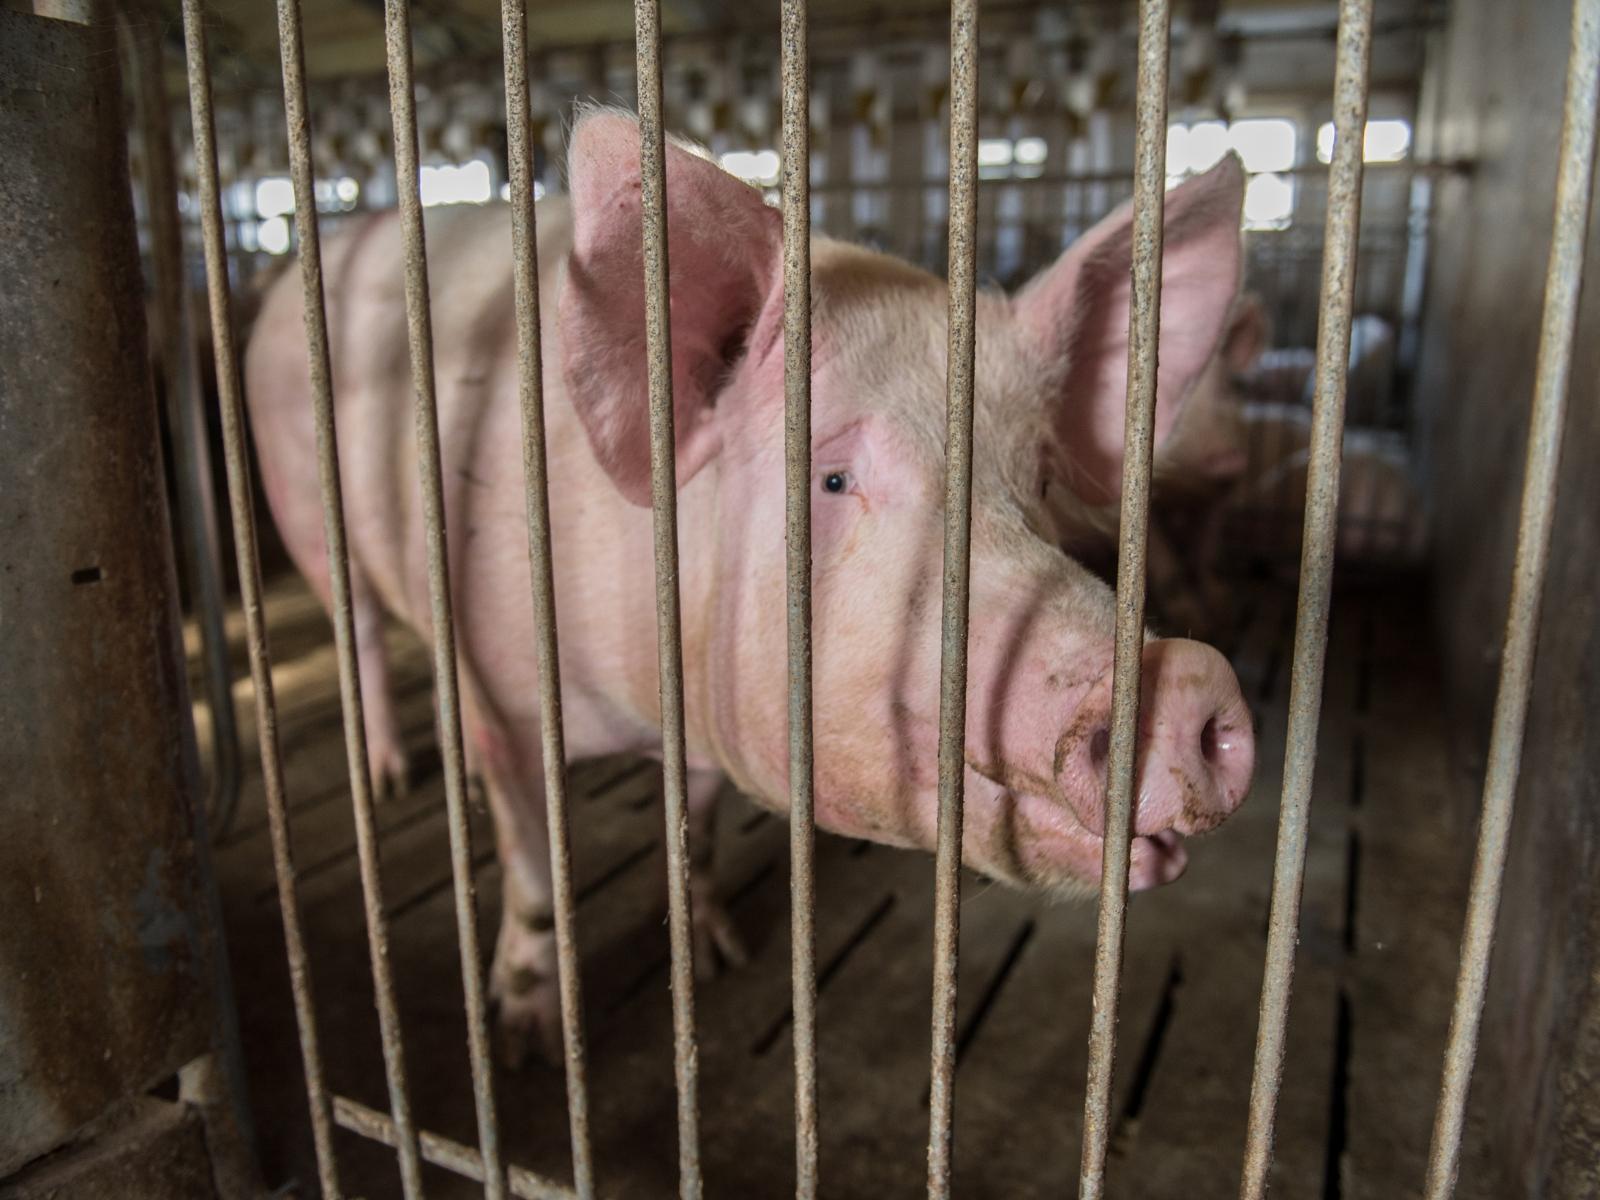 A pig looking through the bars of their cage